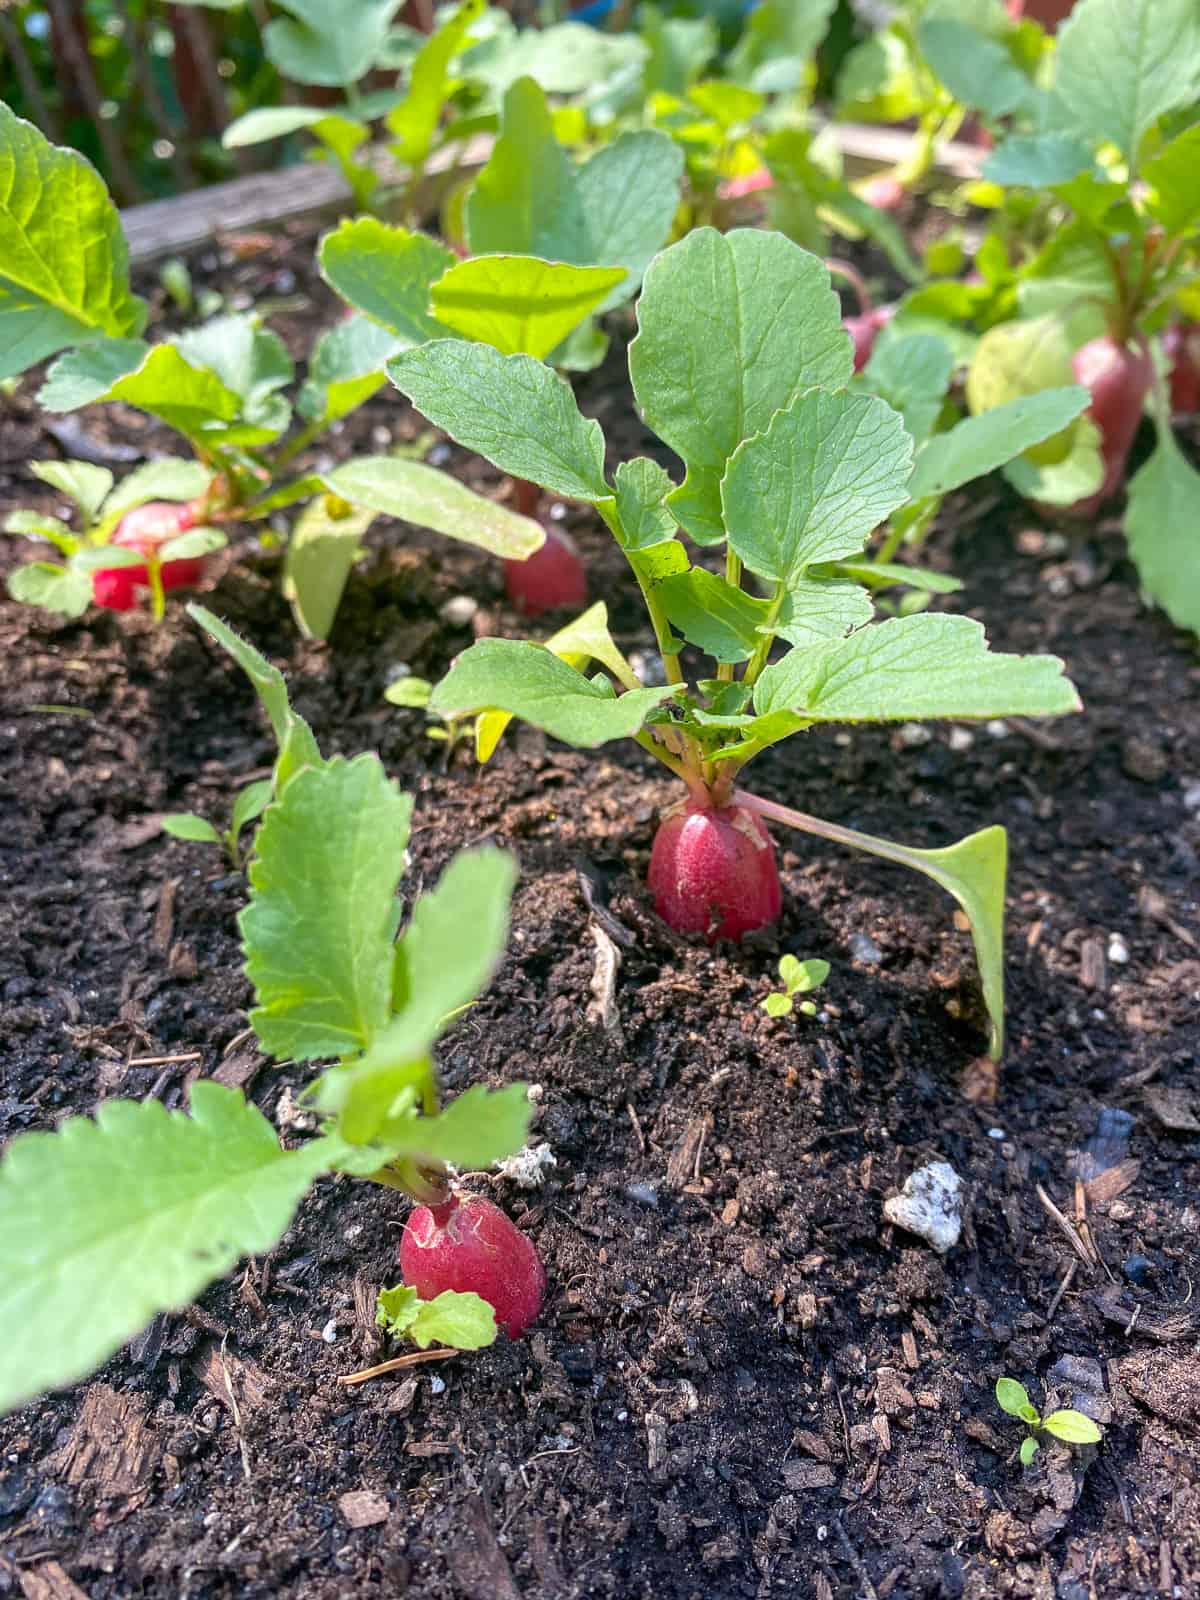 An image of radishes growing in the ground.